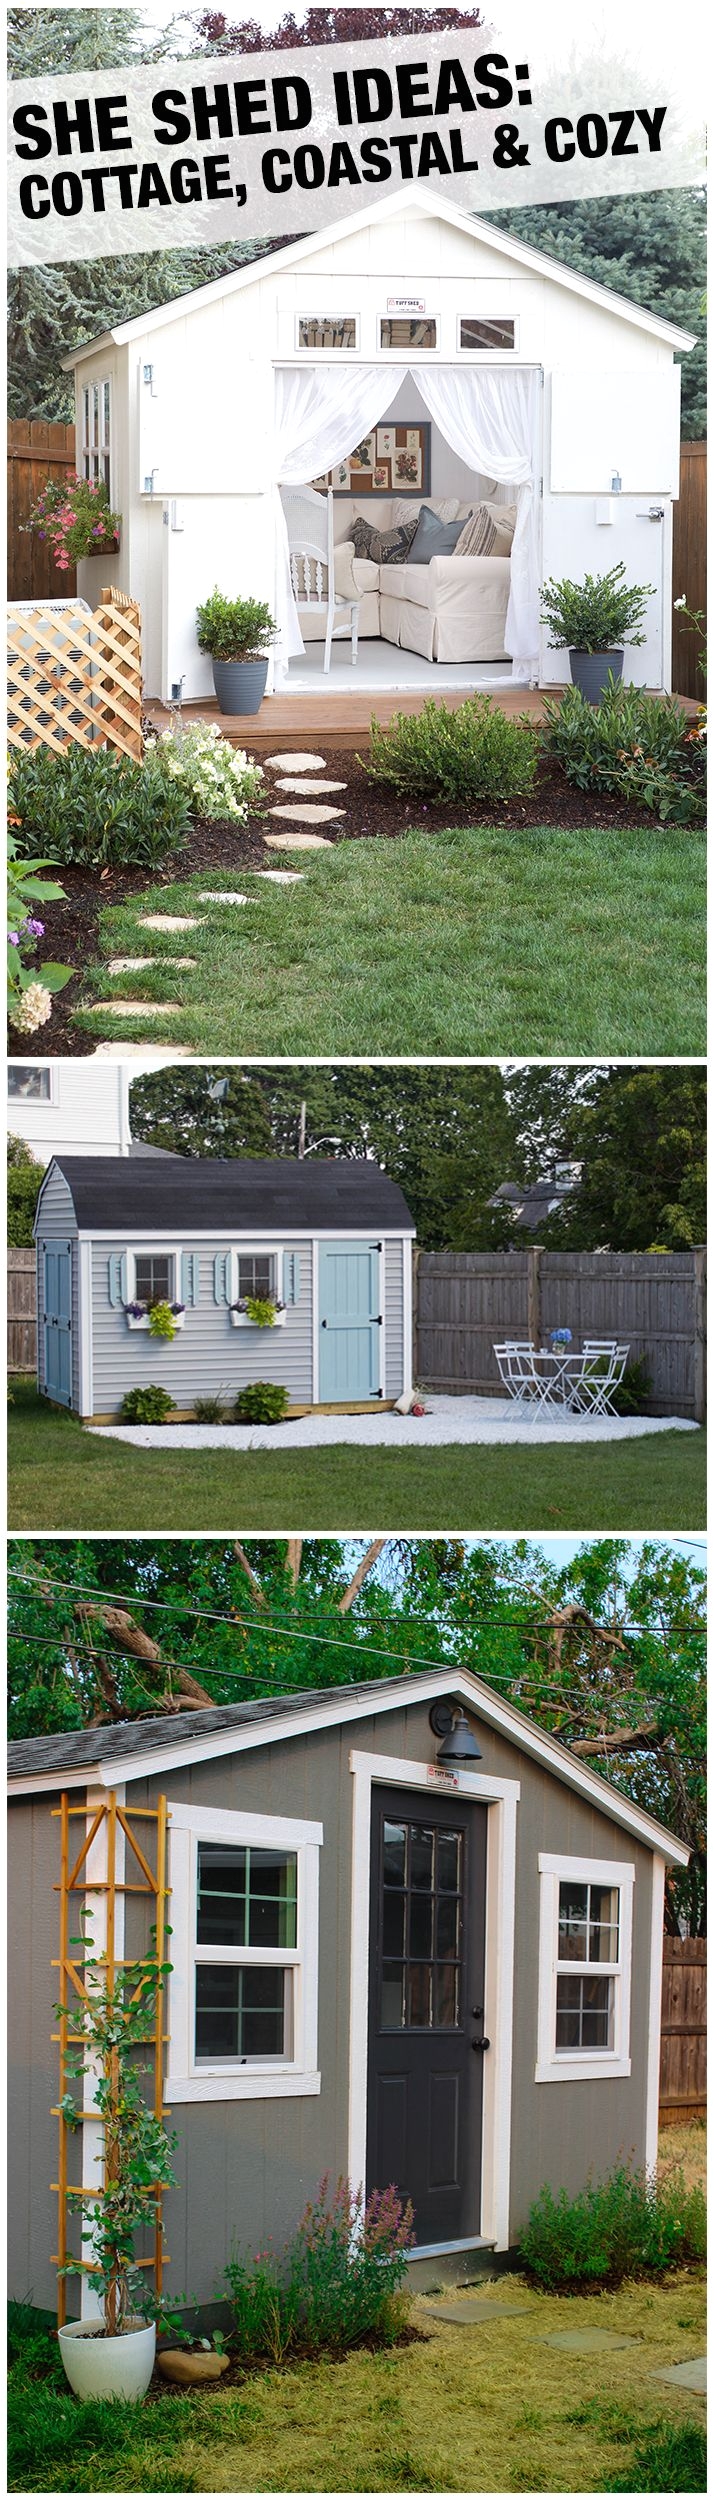 she sheds are one of the best backyard trends ever all it takes is a